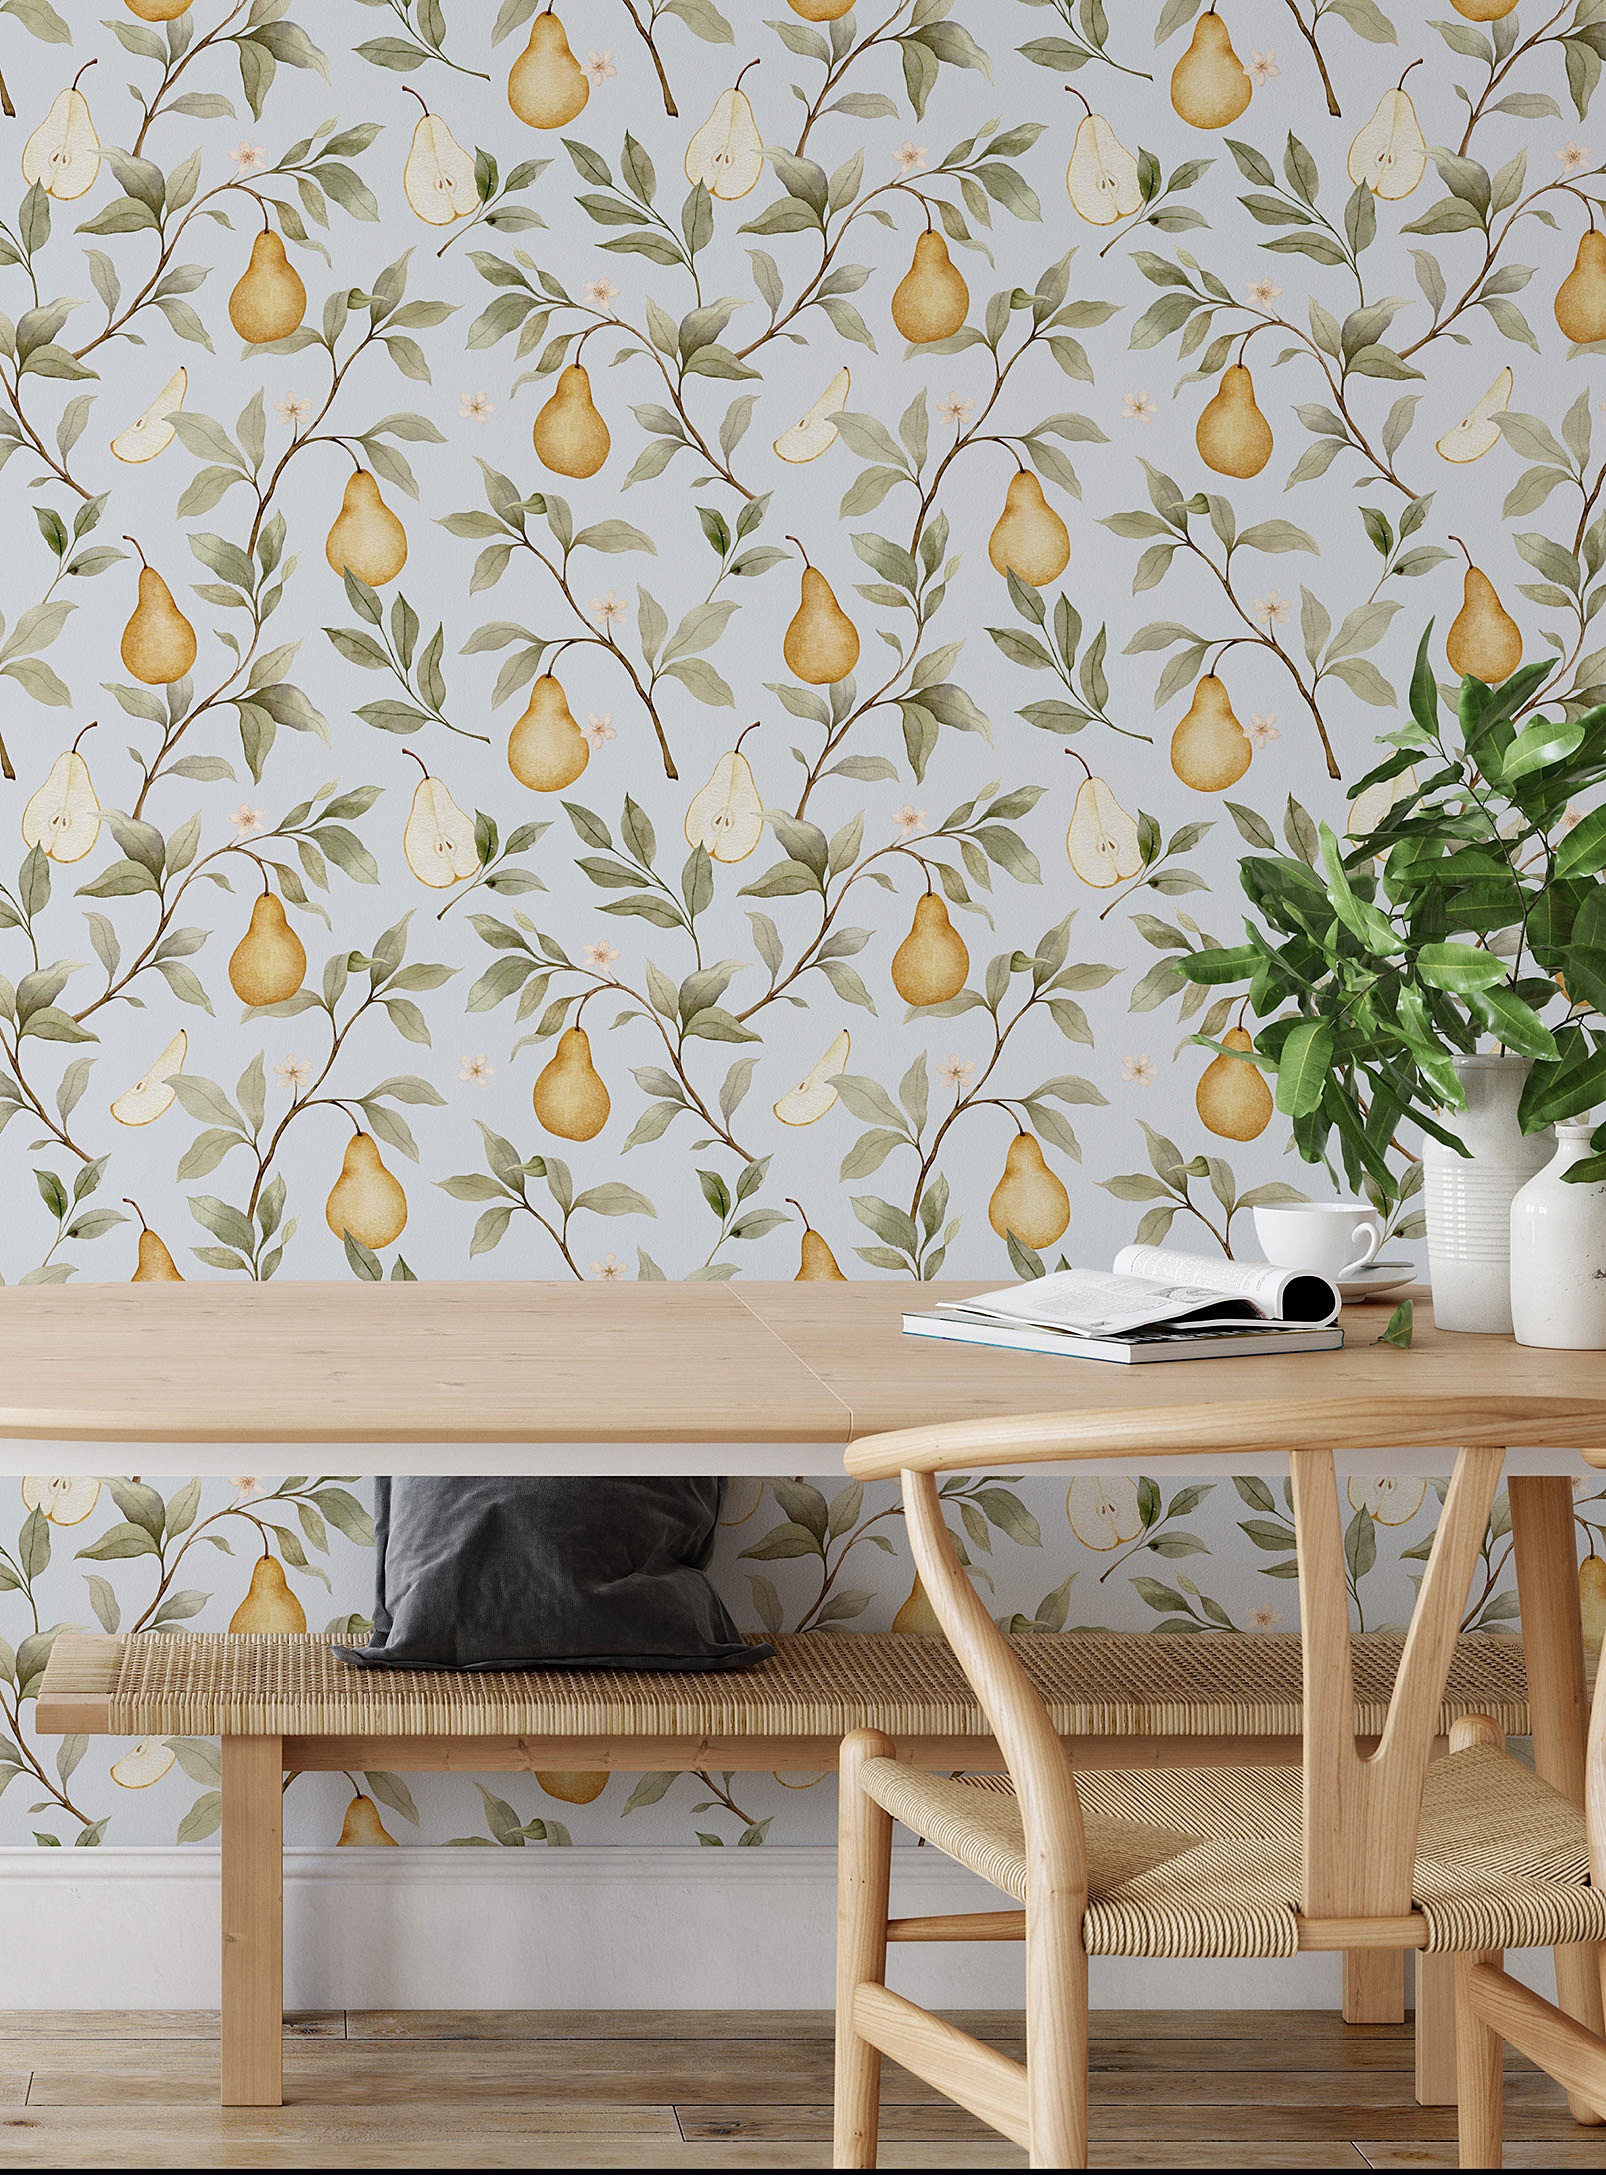 Meraki Pear Groove Self-adhesive Wallpaper Strip In Collaboration With Artist Marie-lise Leclerc In Baby Blue